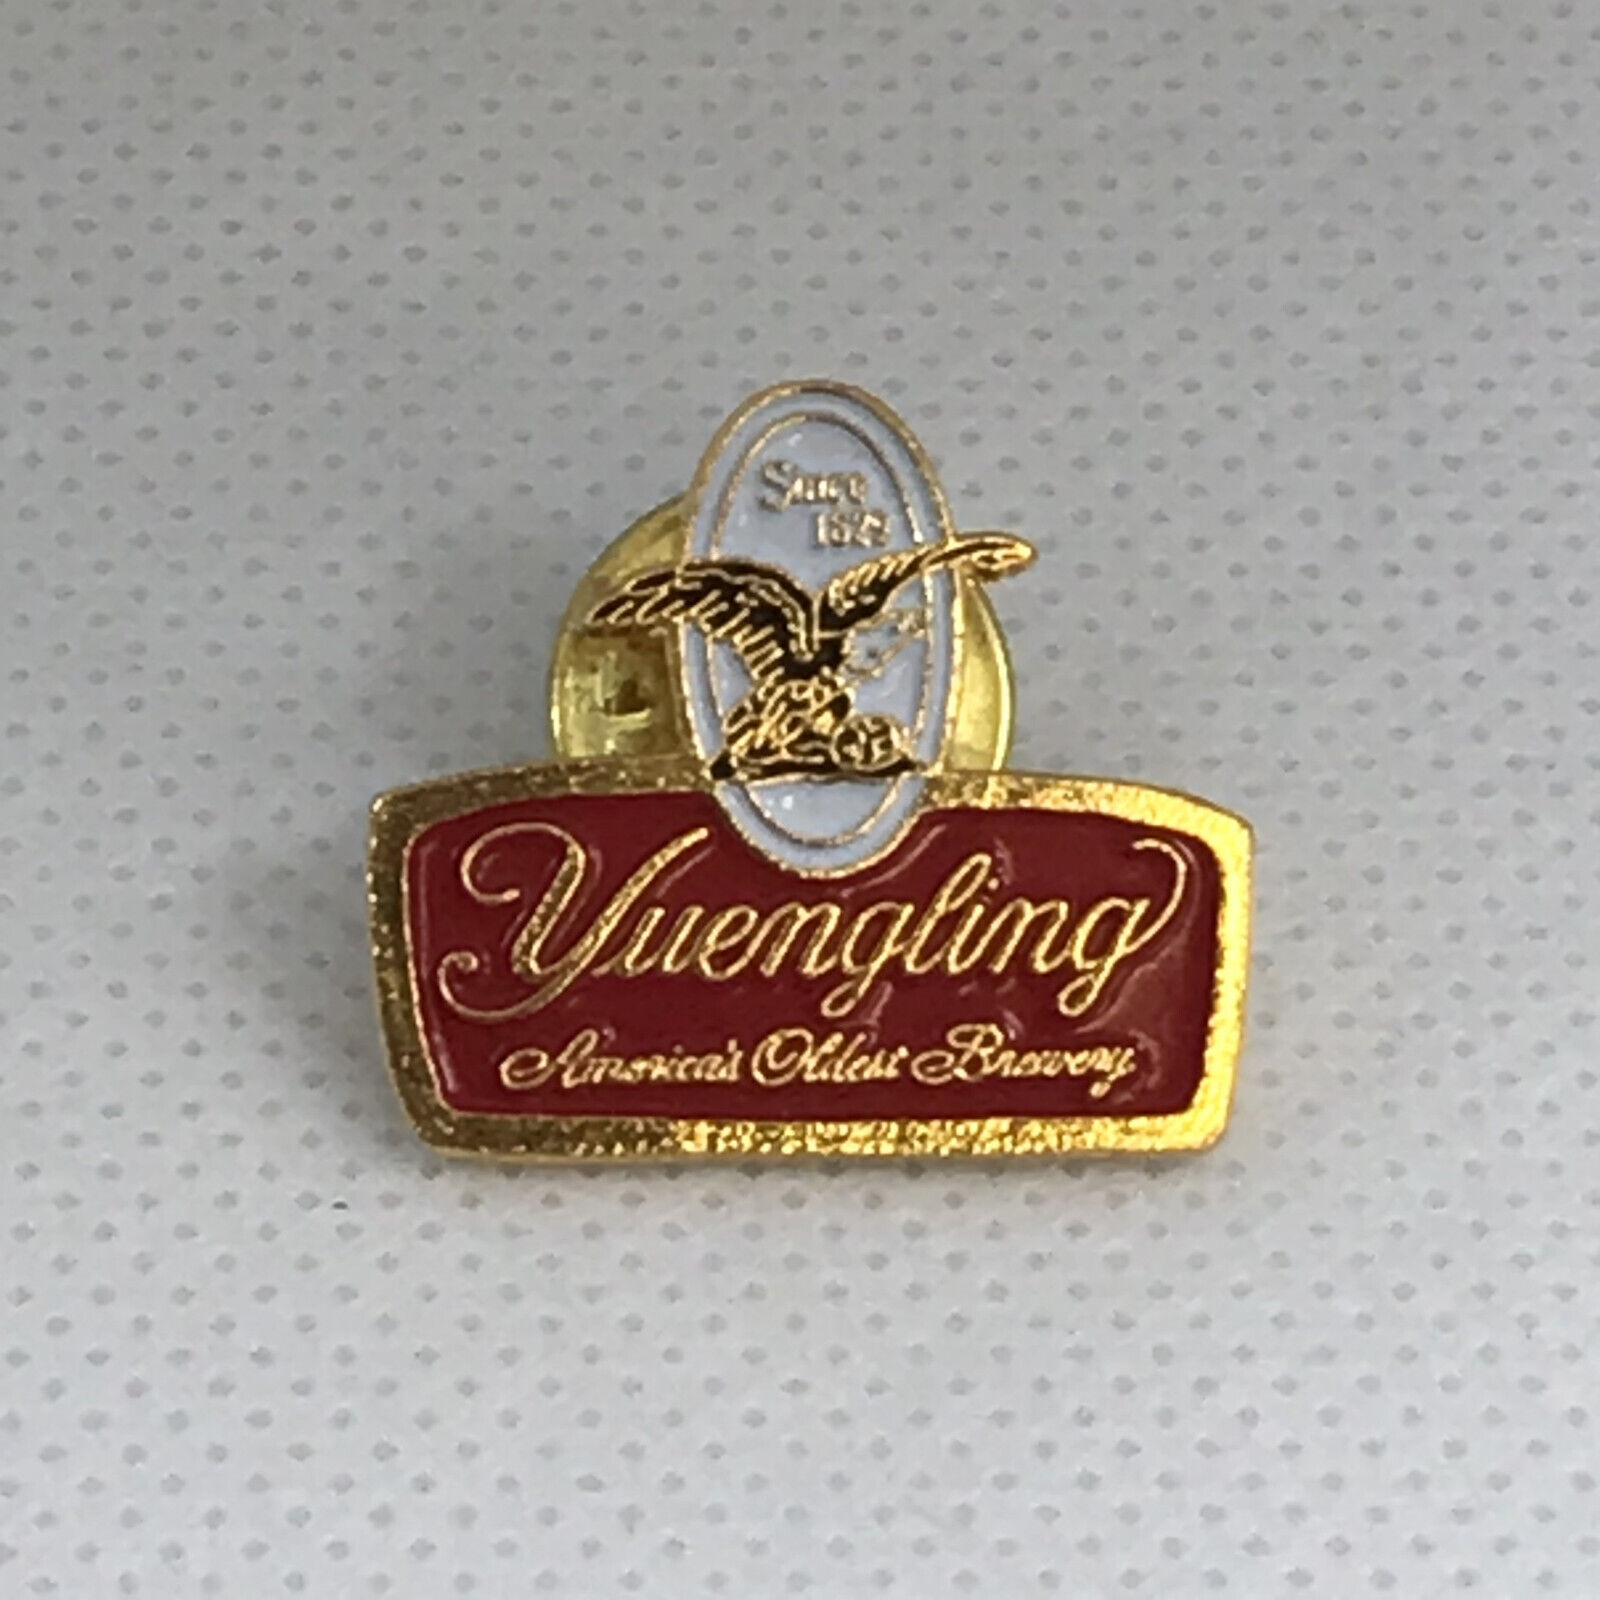 Yuengling Beer Hat Lapel Pin Souvenir Americas Oldest Brewery Pottsville PA